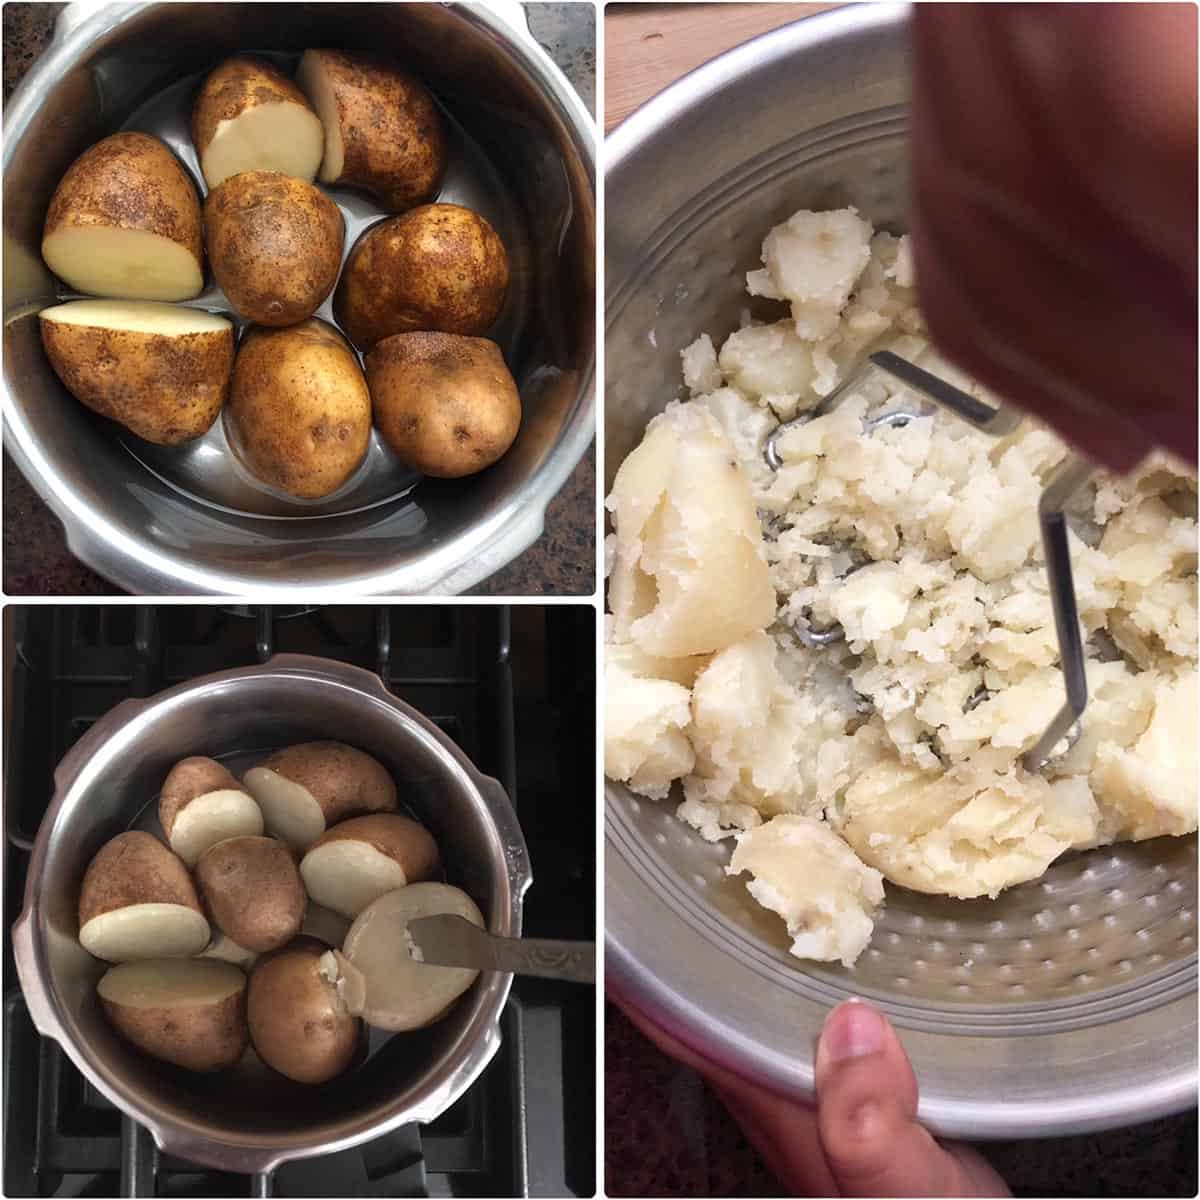 Boiled potatoes, mashed in a steel bowl